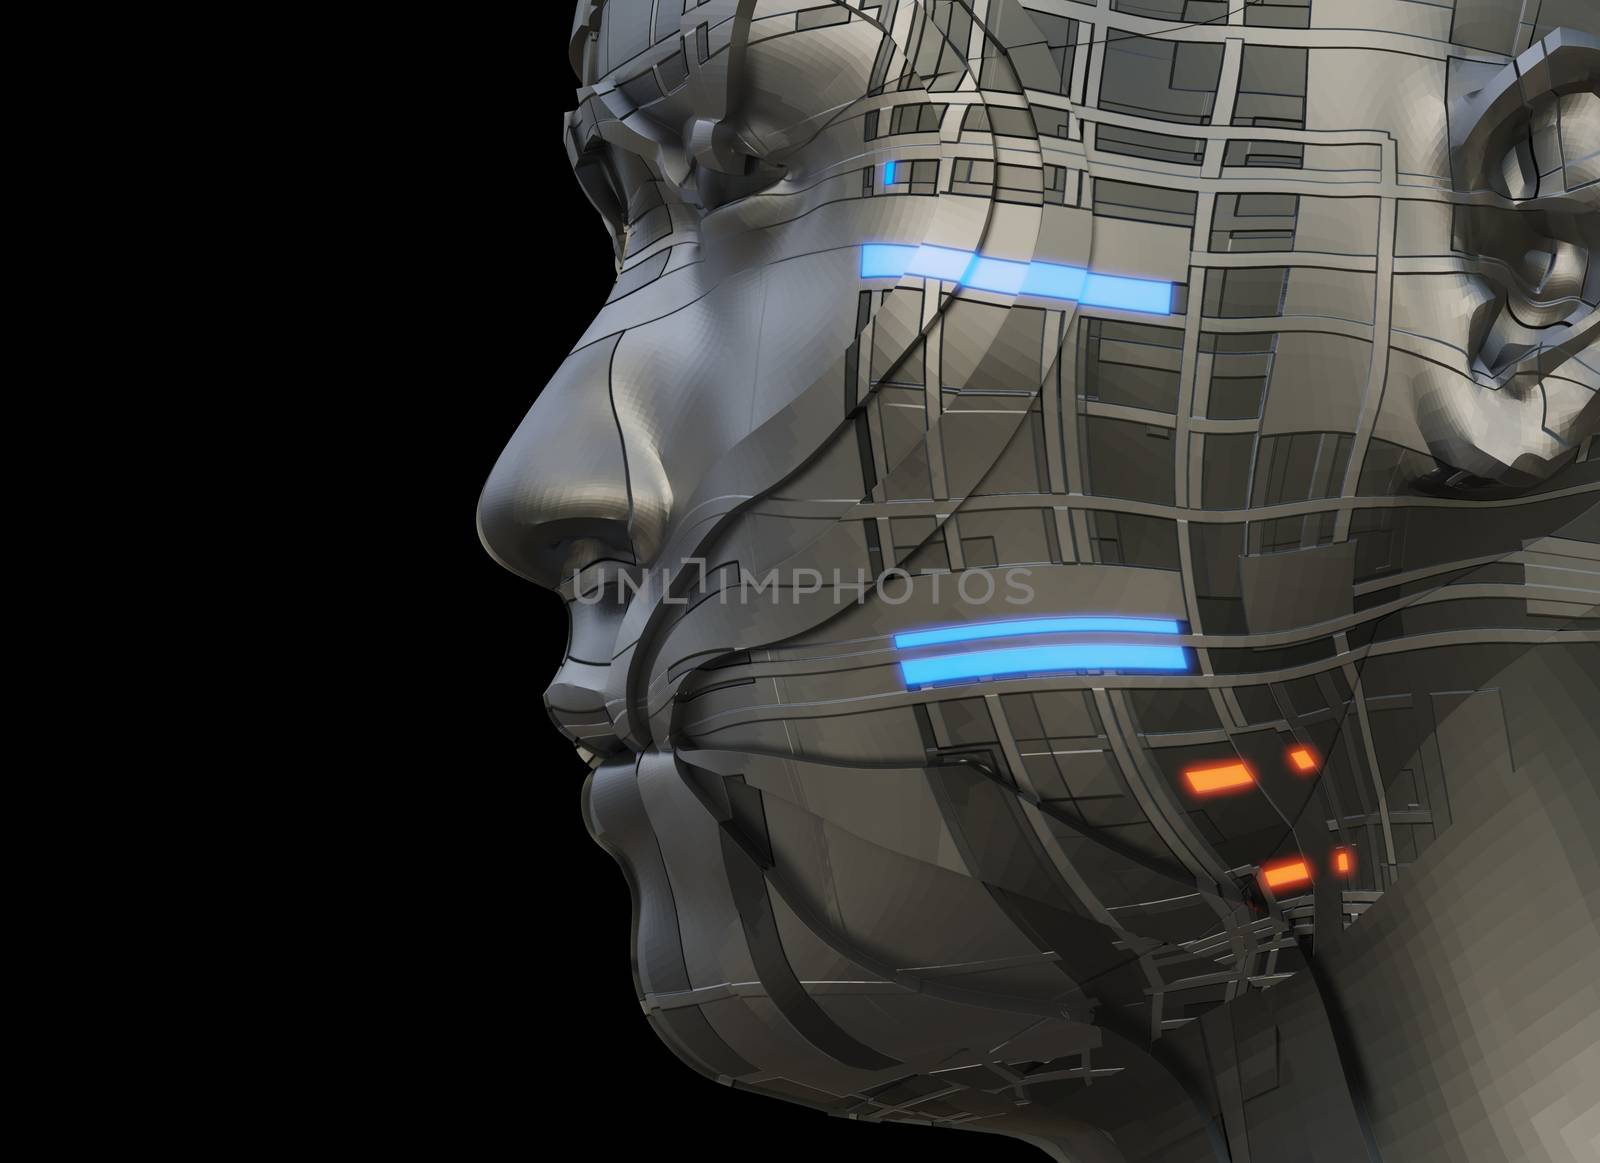 Futuristic robot of dark color with luminous parts of blue and orange. Isolated on black background. The concept of robotic and industrial revolution 4.0. 3D illustration